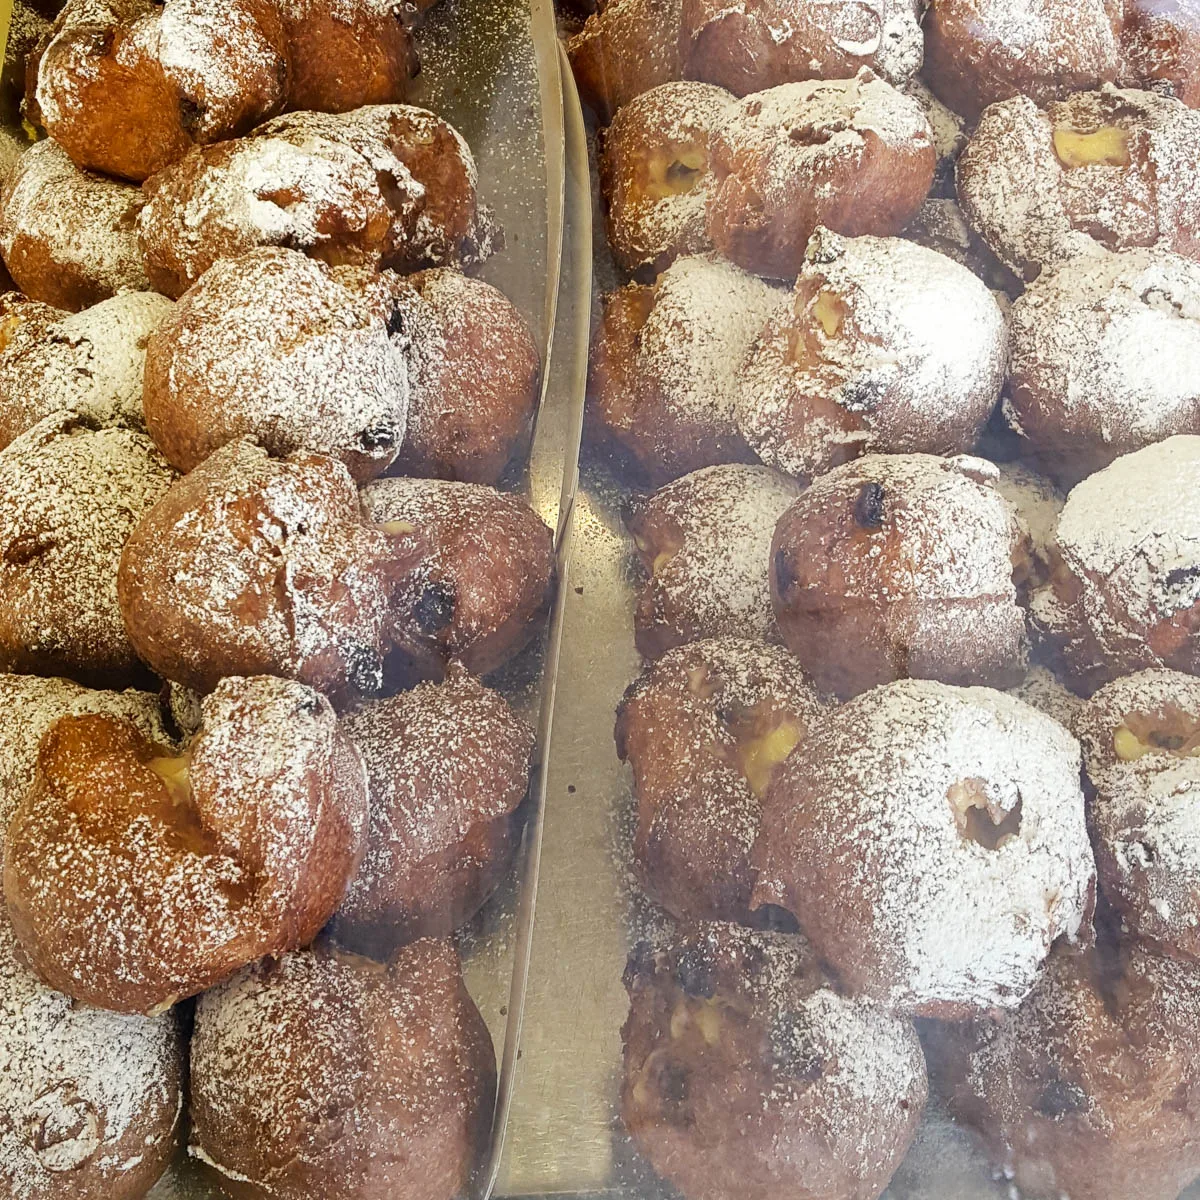 Frittelle with crema - Venice, Italy - www.rossiwrites.com